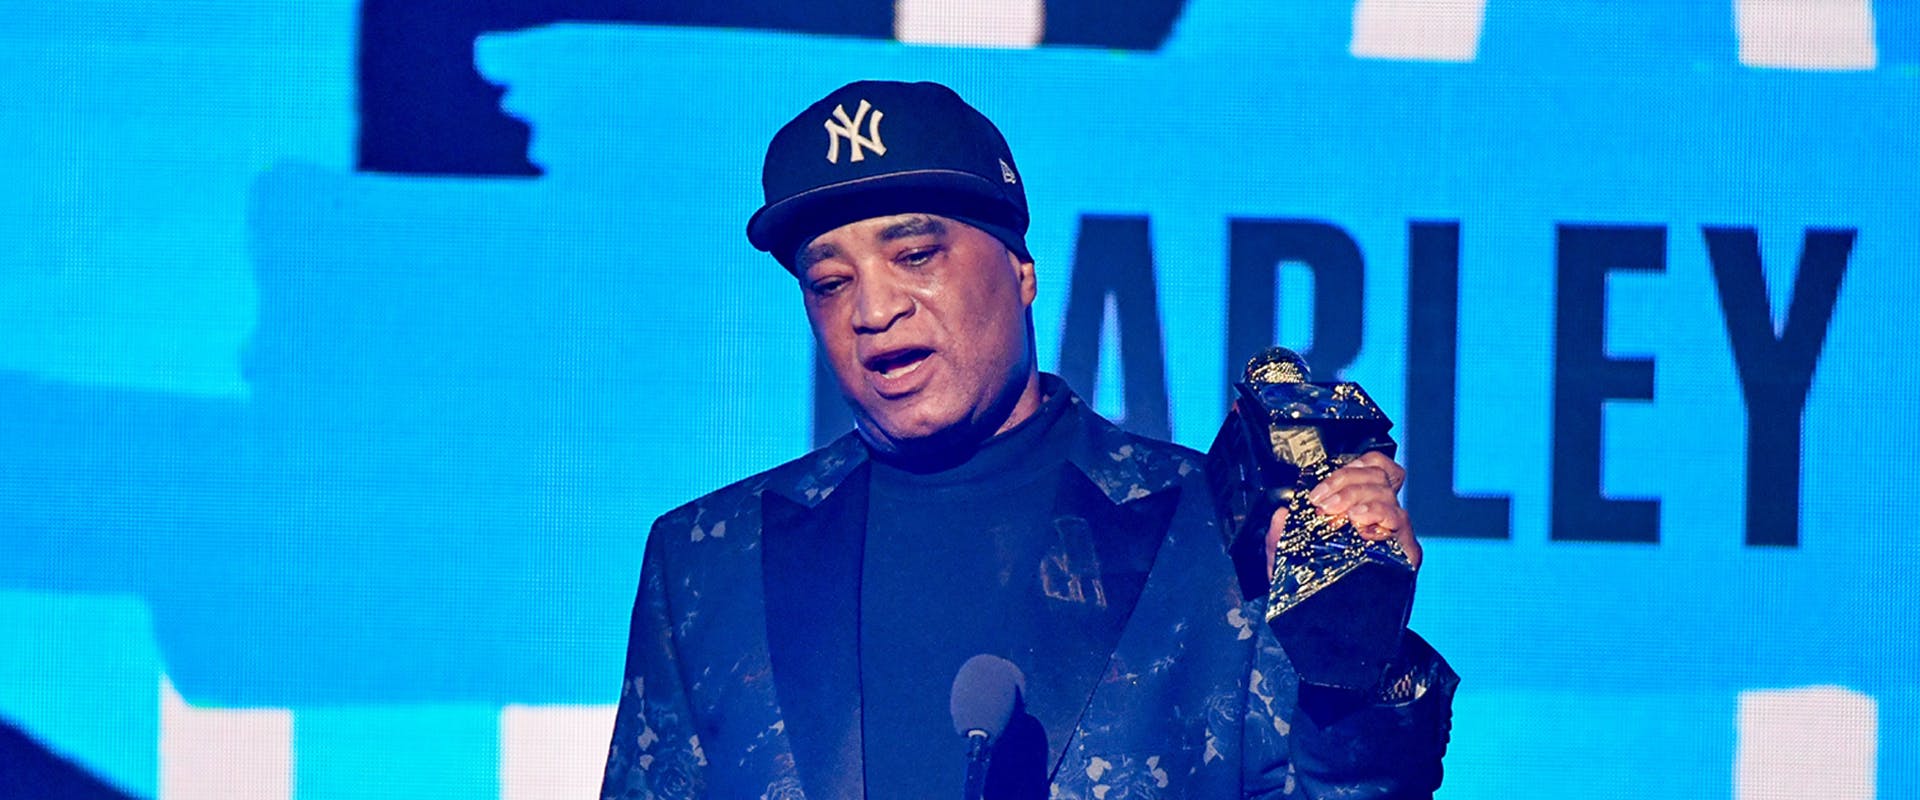 BET Hip Hop Awards 2023 - Show
ATLANTA, GEORGIA - OCTOBER 03: In this image released on October 10, 2023, Marley Marl speaks onstage during the BET Hip Hop Awards at Cobb Energy Performing Arts Center on October 3, 2023 in Atlanta, Georgia.